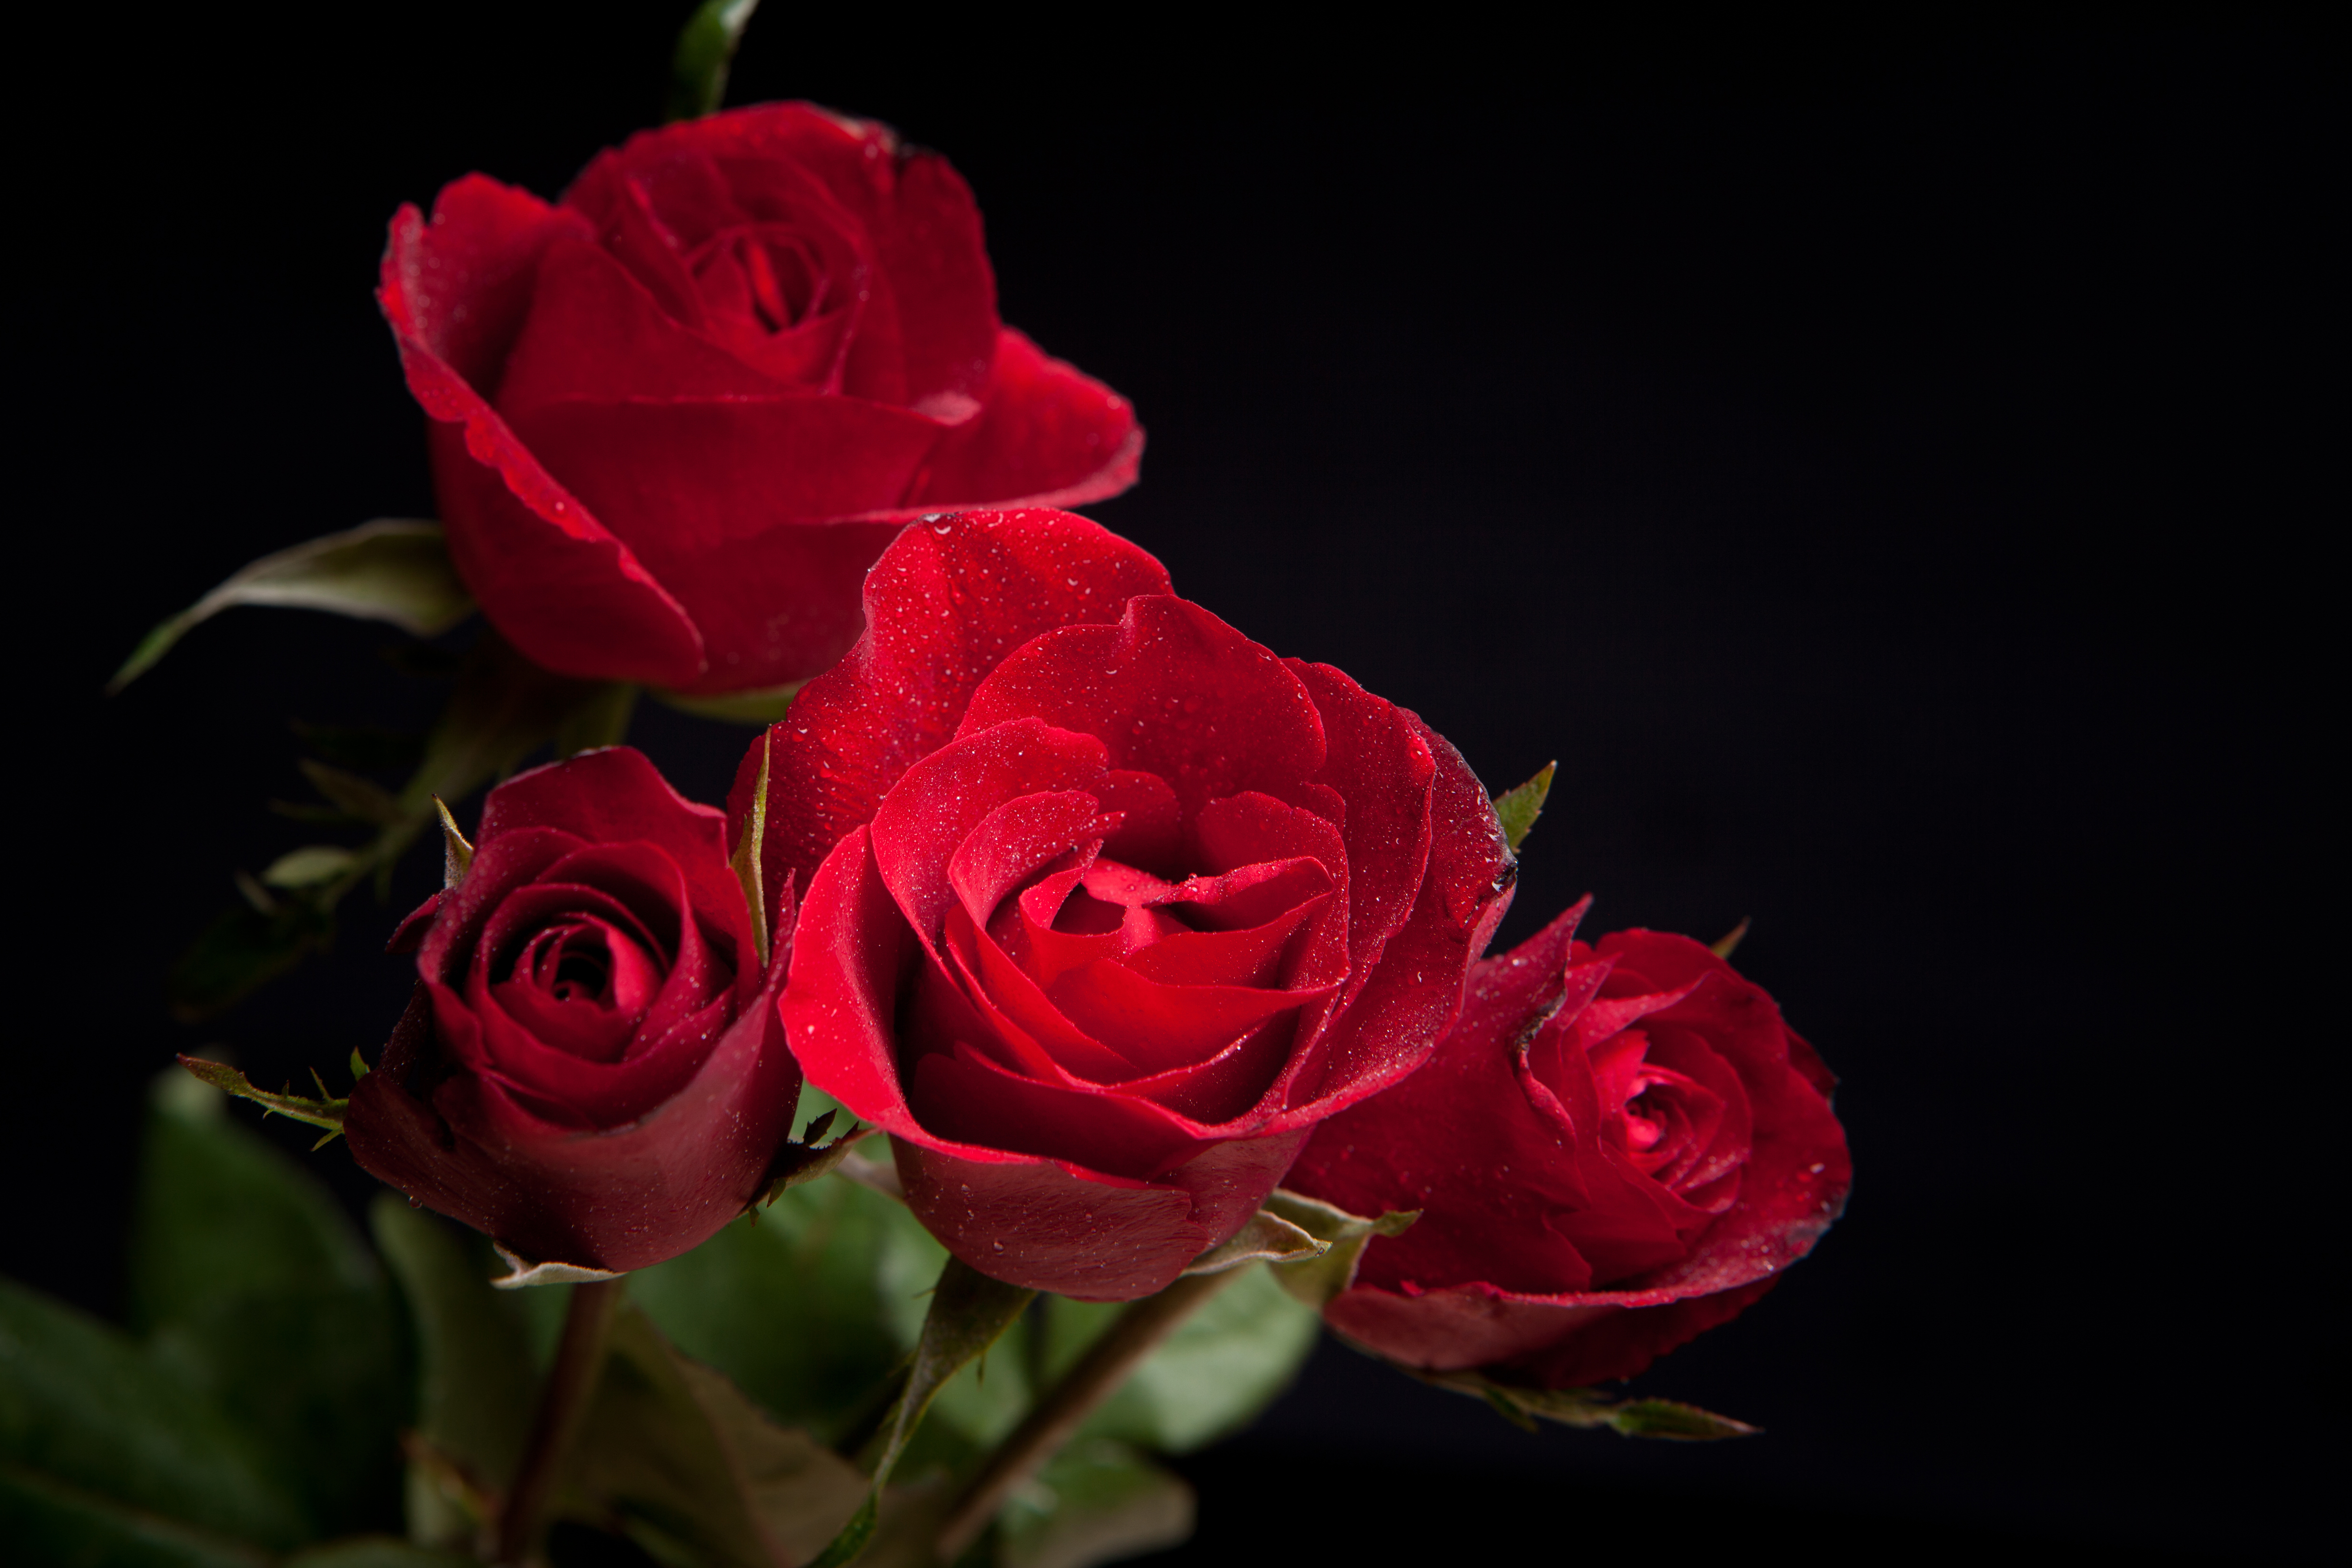 Free Download Red Roses Black Background Gallery Yopriceville High 4971x3314 For Your Desktop Mobile Tablet Explore 69 Red Roses On Black Background Black Roses Wallpaper Black And White Rose